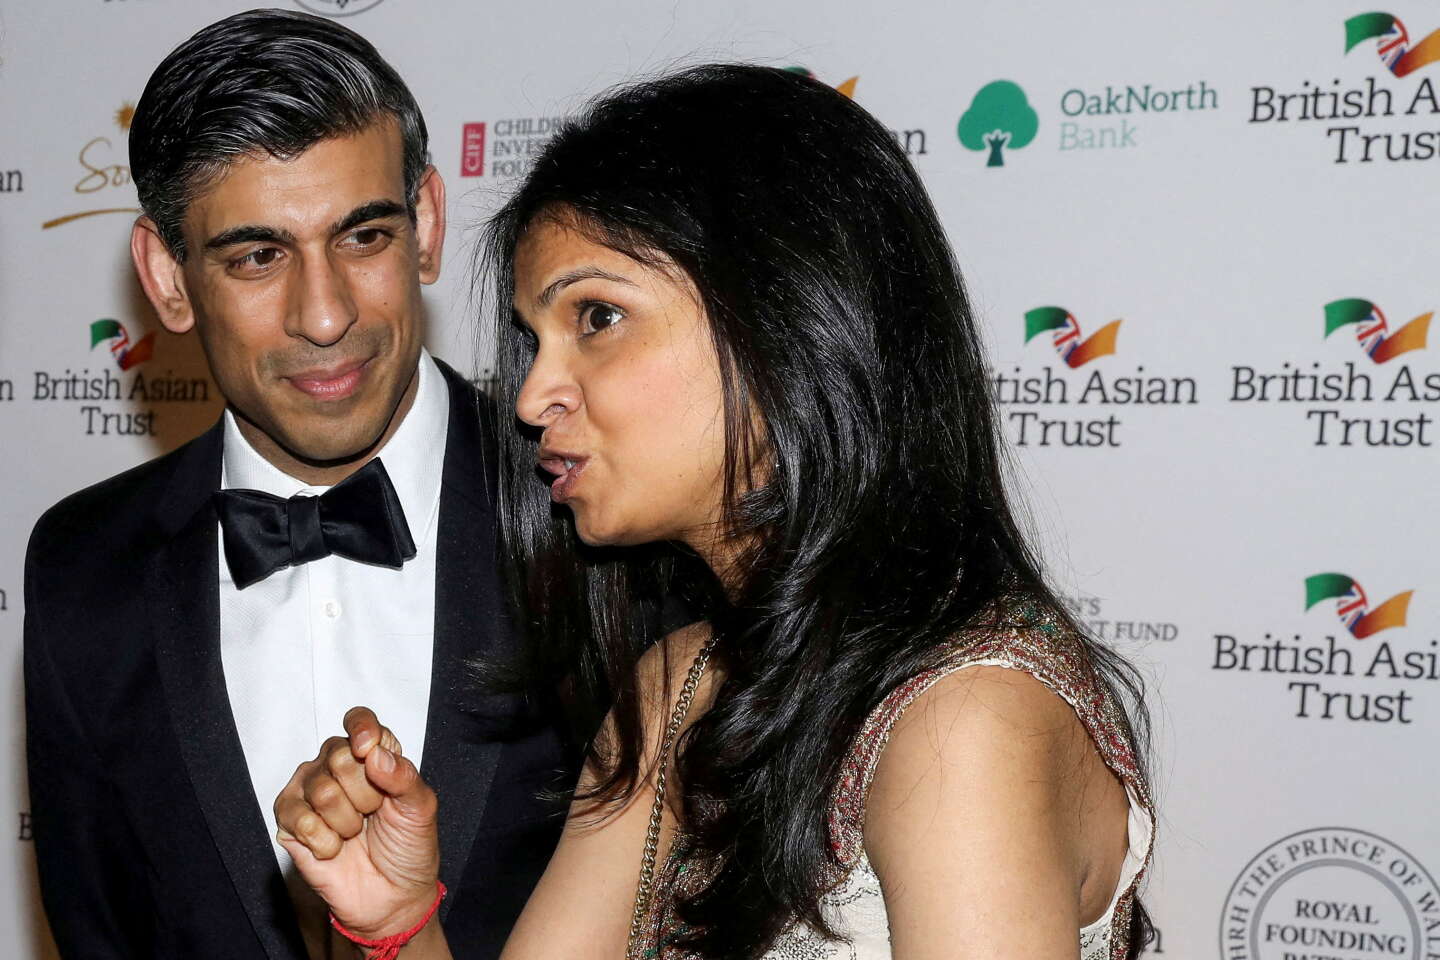 In the UK, Chancellor of the Exchequer Rishi Sunak in crisis